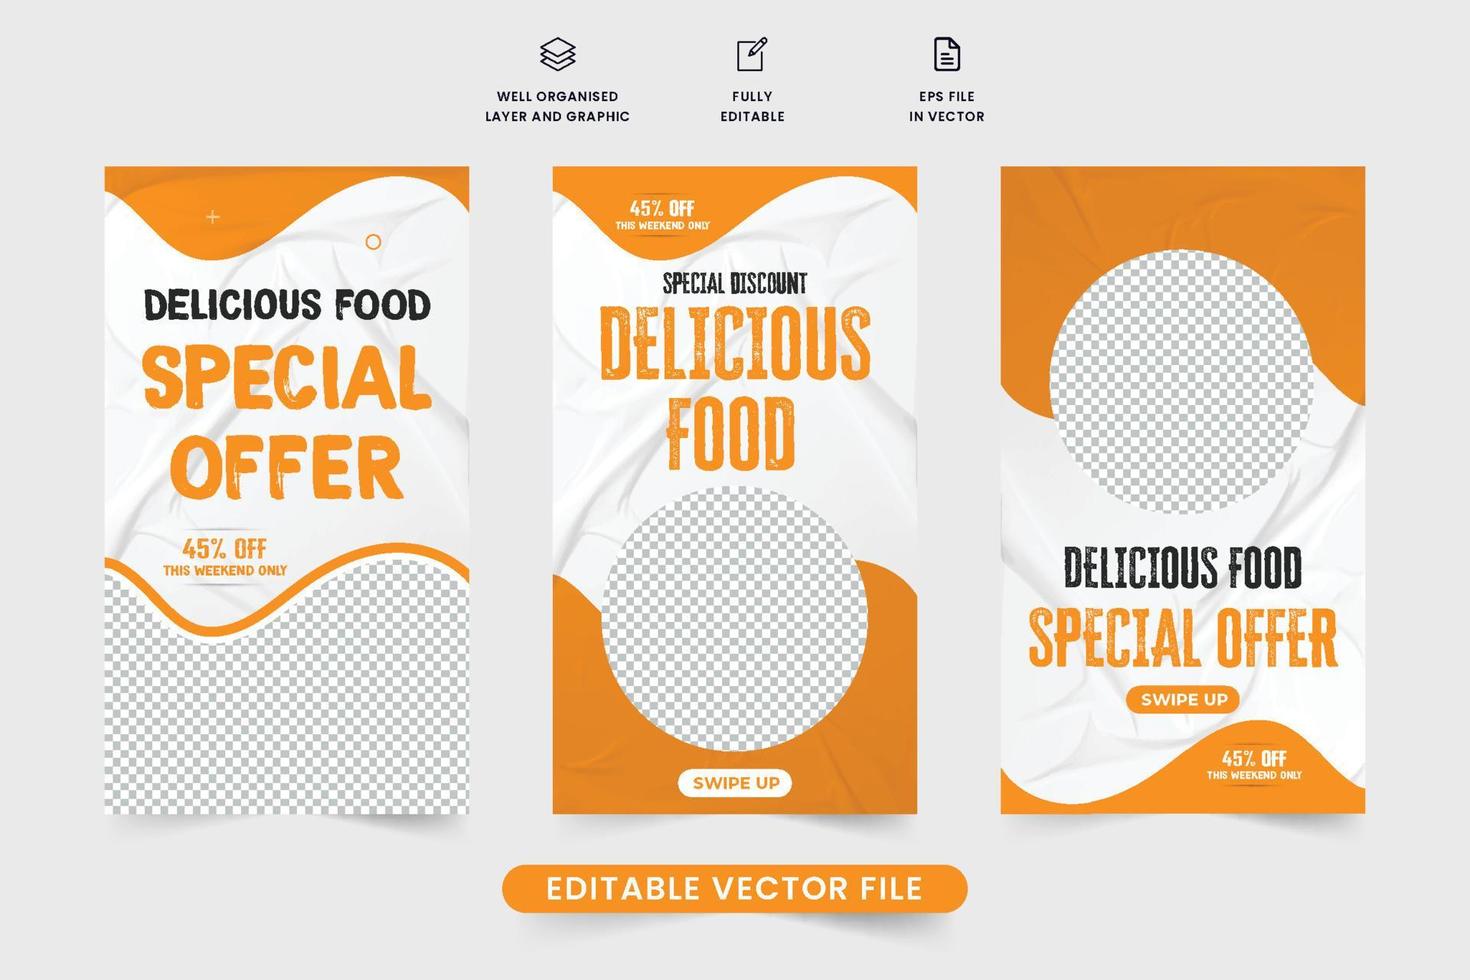 Delicious food menu social media story vector with yellow and dark colors. Latin American food promotional template design with abstract shapes. Special food discount poster design for marketing.